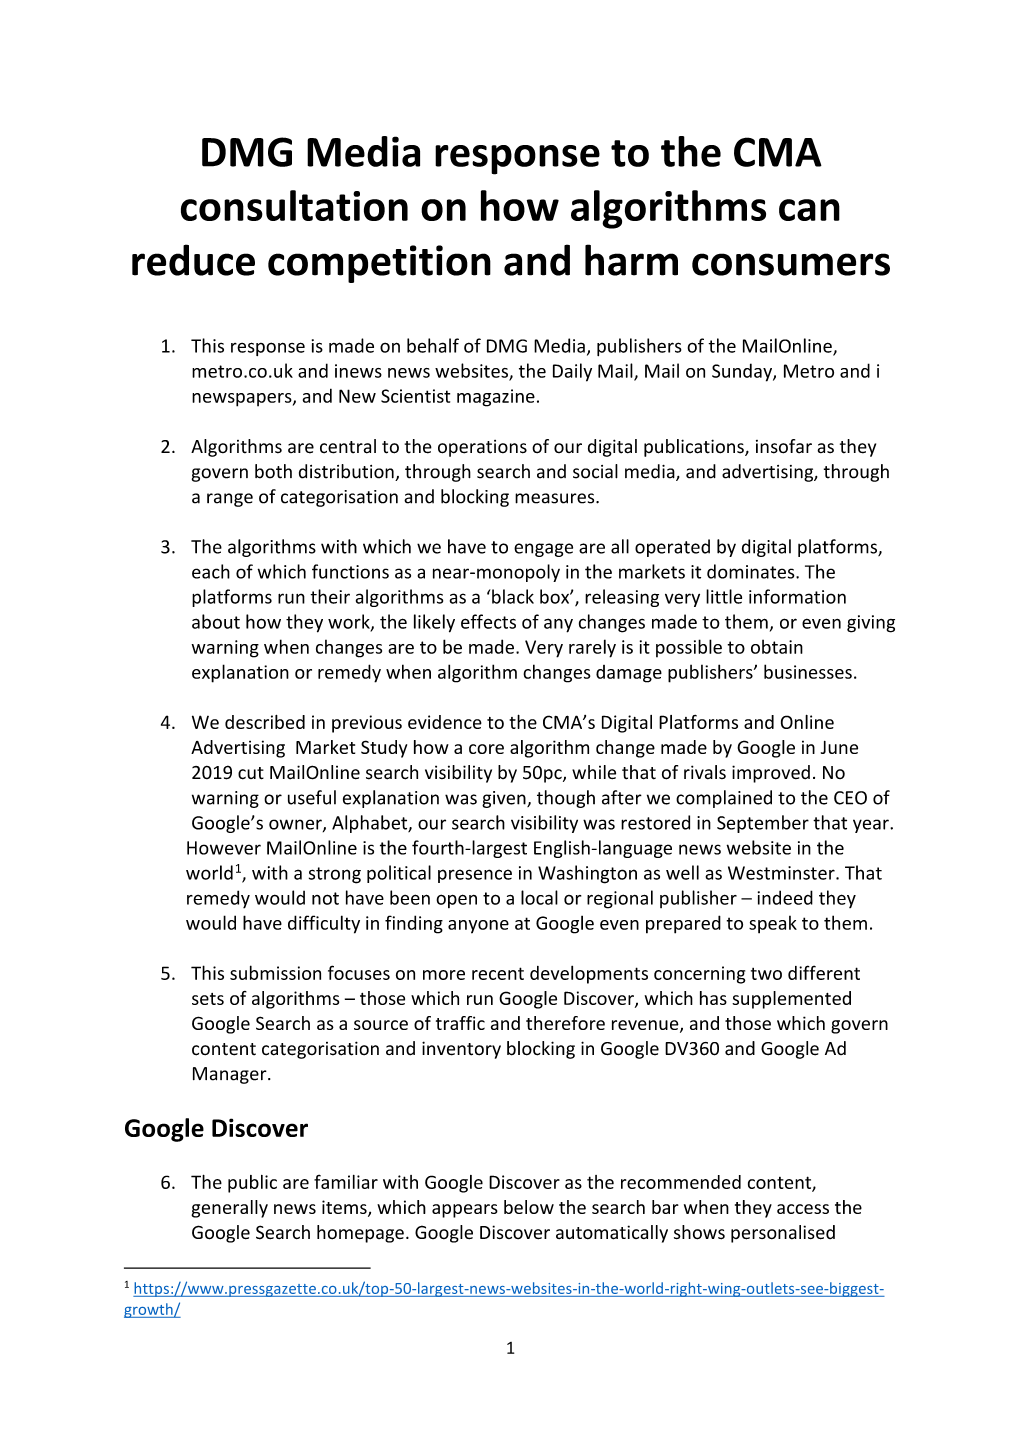 DMG Media Response to the CMA Consultation on How Algorithms Can Reduce Competition and Harm Consumers